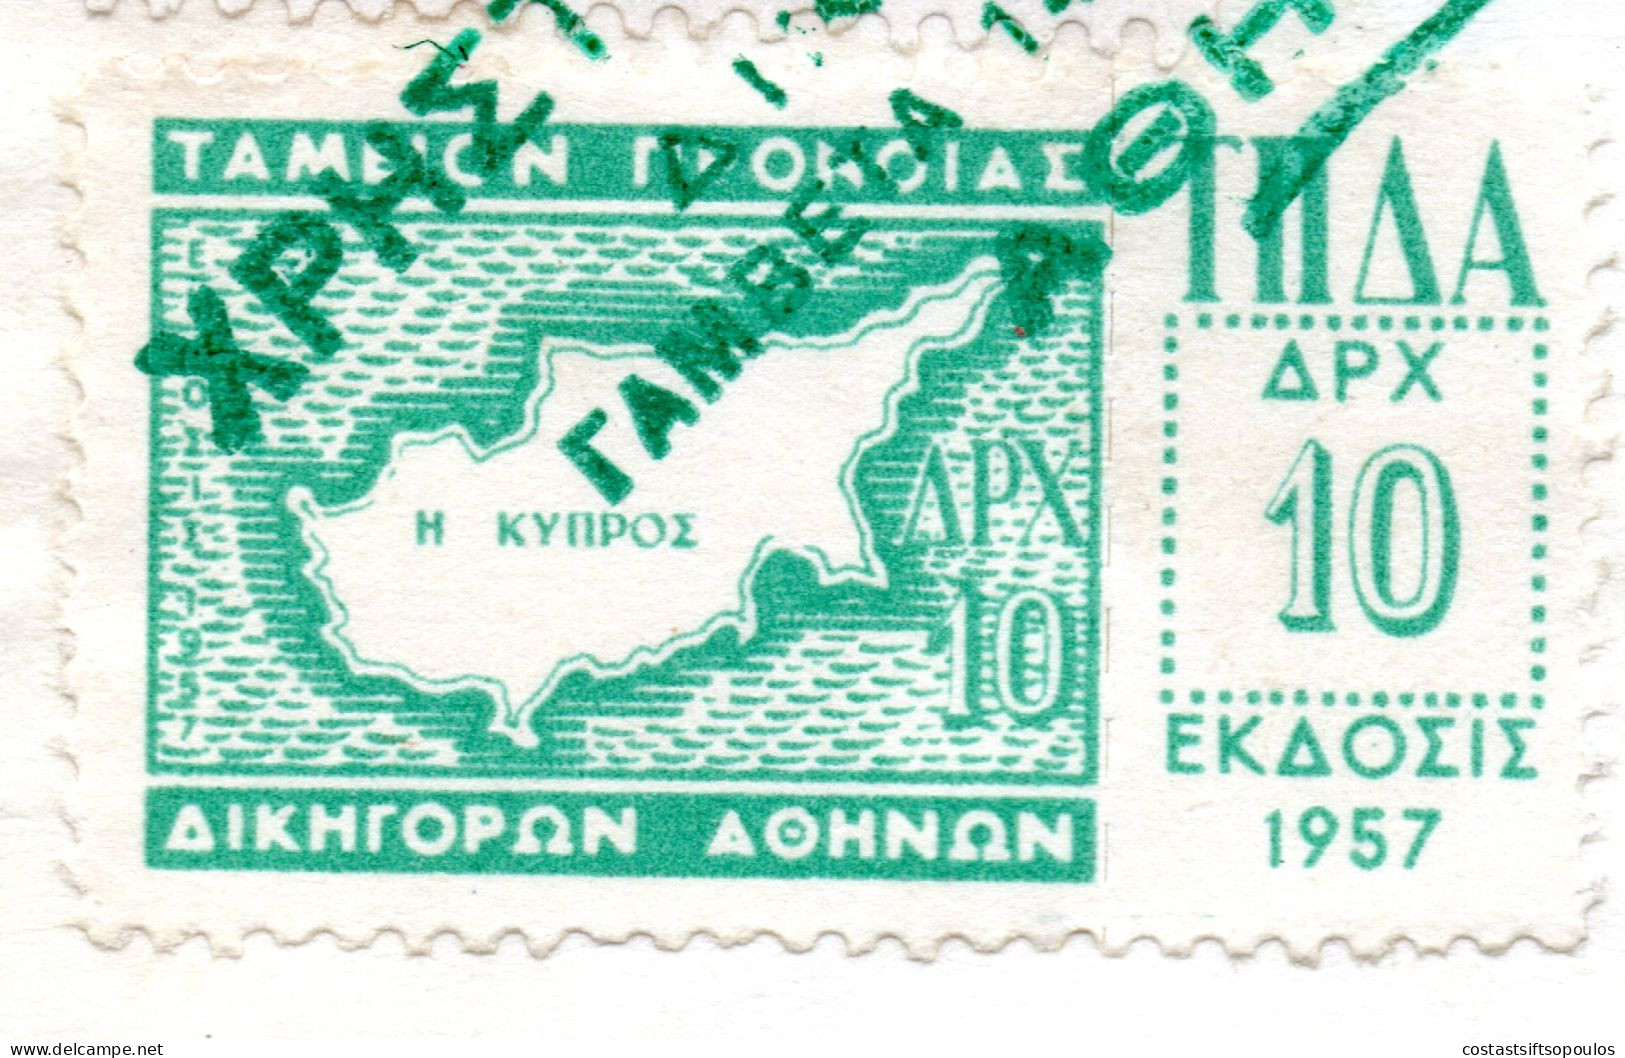 2505. GREECE. 1960 6 PAGES DOCUMENT WITH SCARCE 1957 CYPRUS MAP 10 DR. REVENUE. CROSS FOLDED. WILL BE SHIPPED FOLDED - Fiscale Zegels